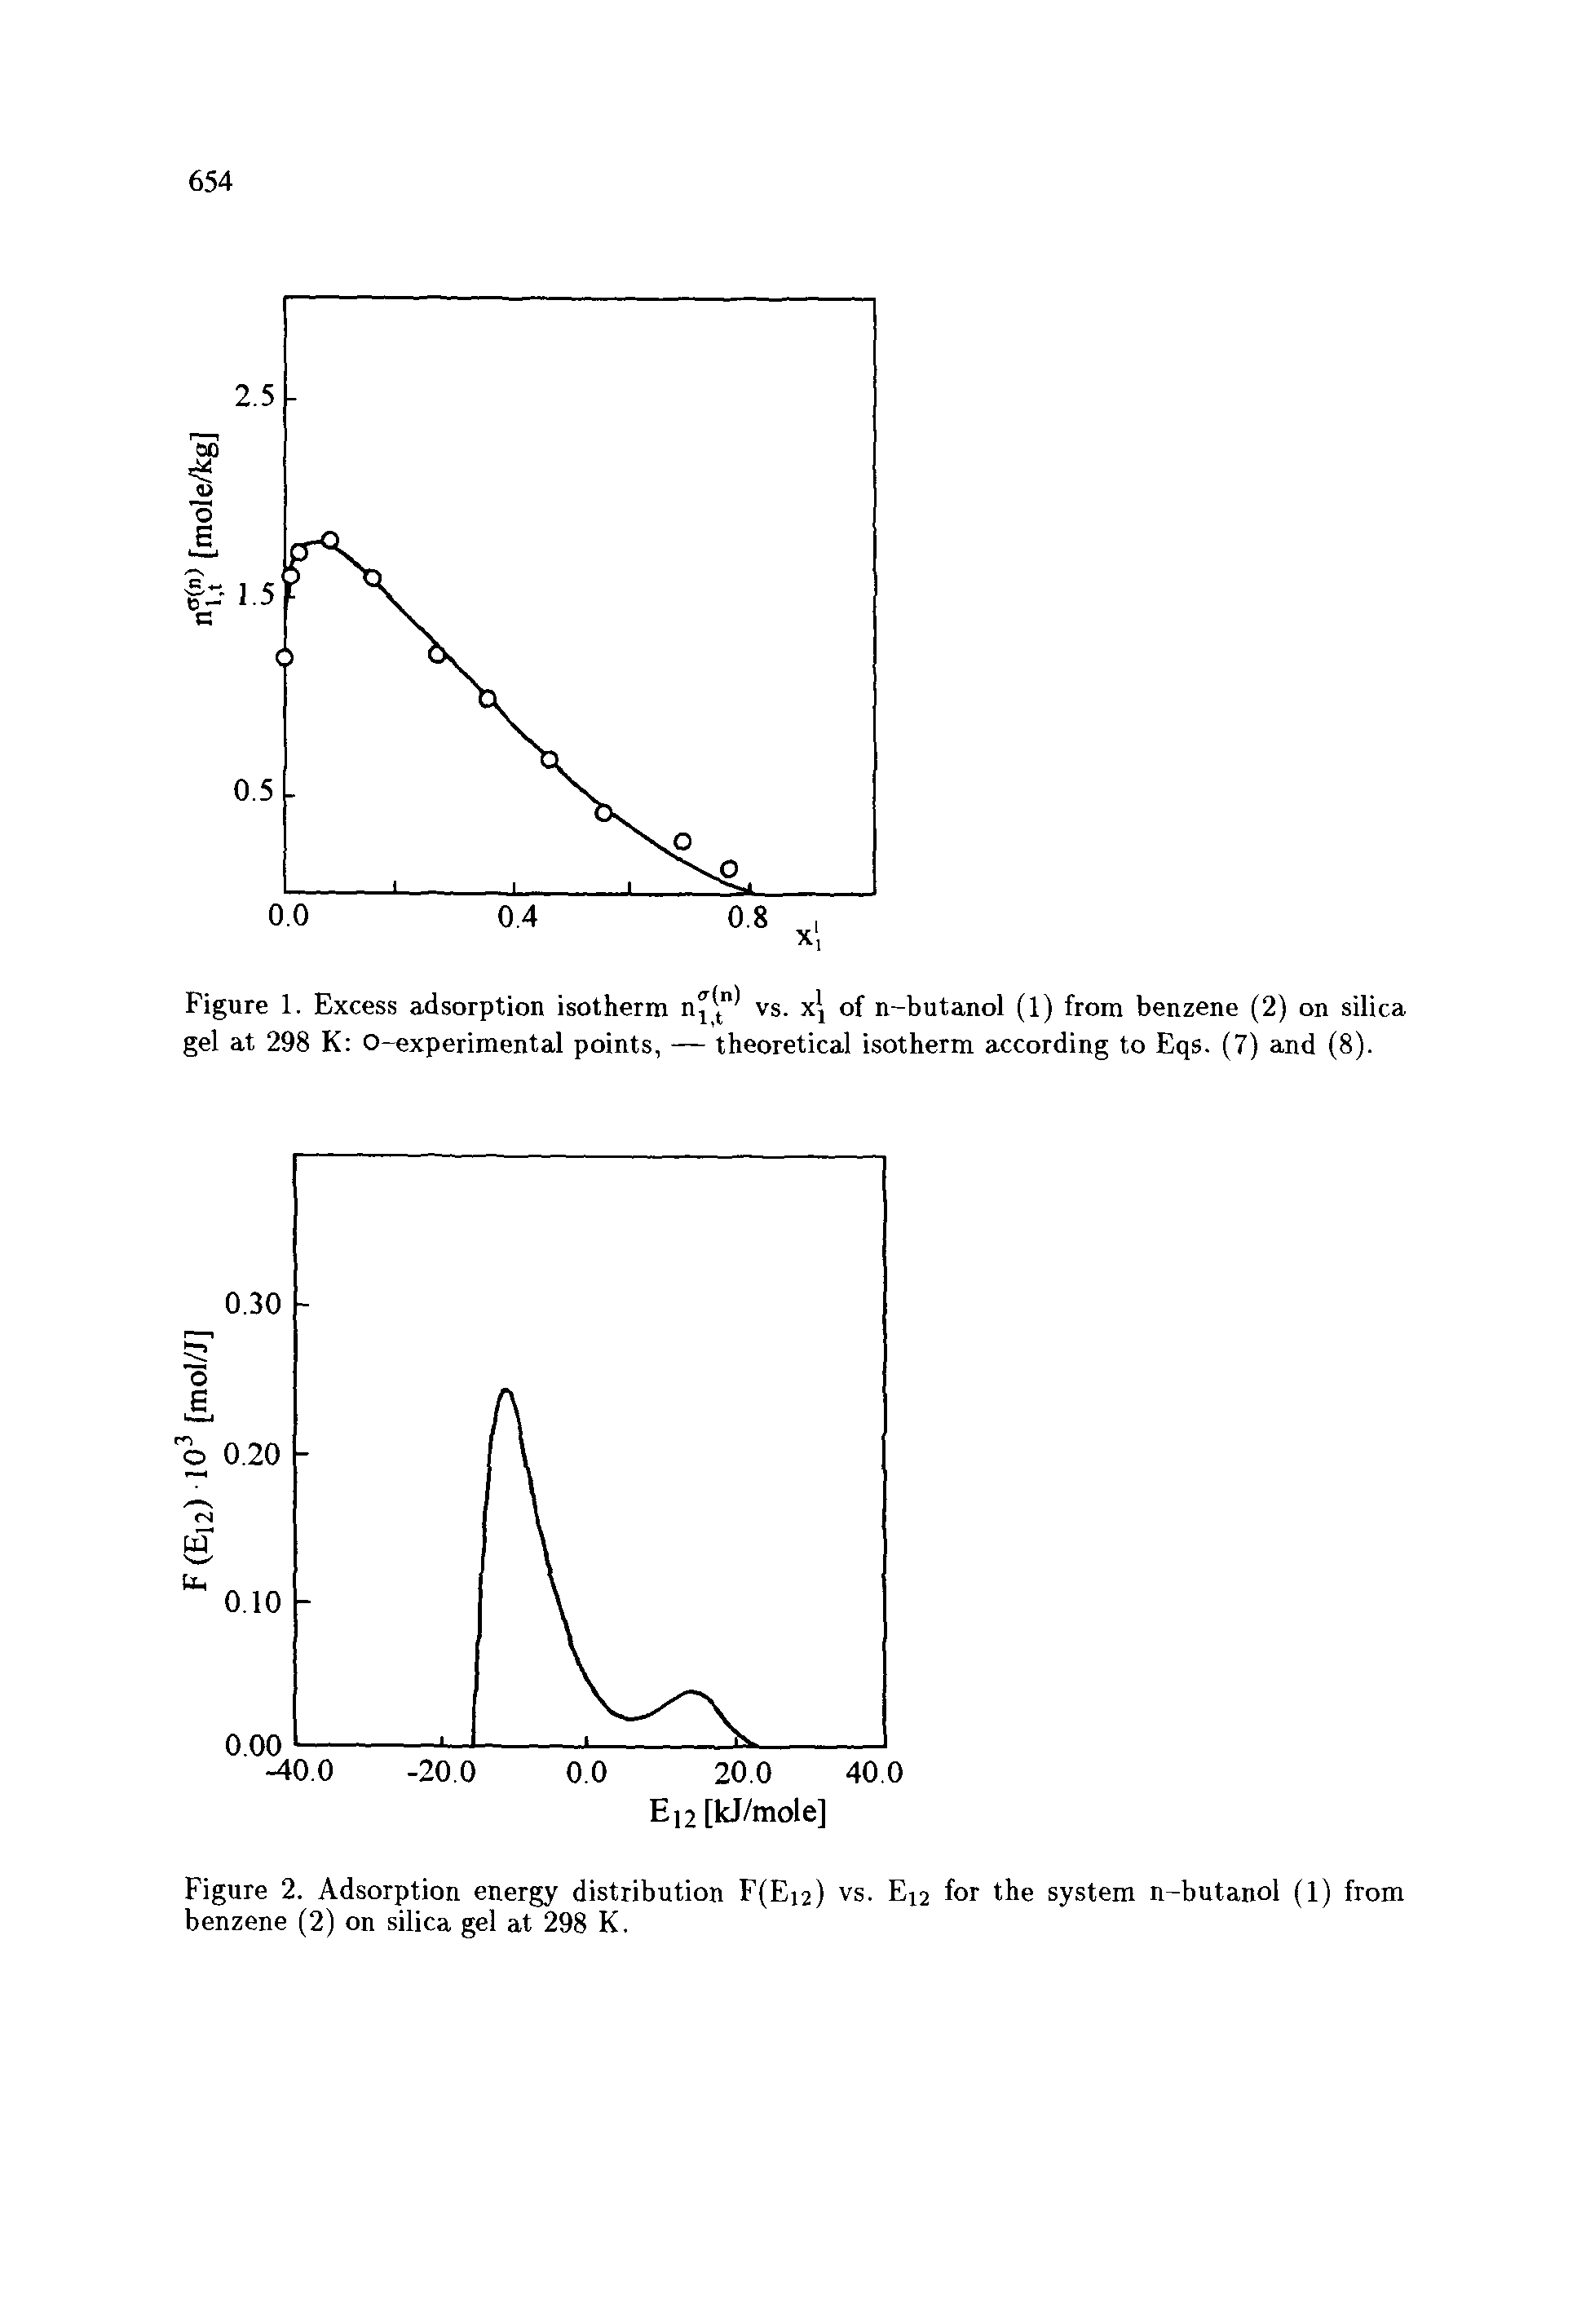 Figure 2. Adsorption energy distribution F(Ei2) vs. E12 for the system n-butanol (1) from benzene (2) on silica gel at 298 K.